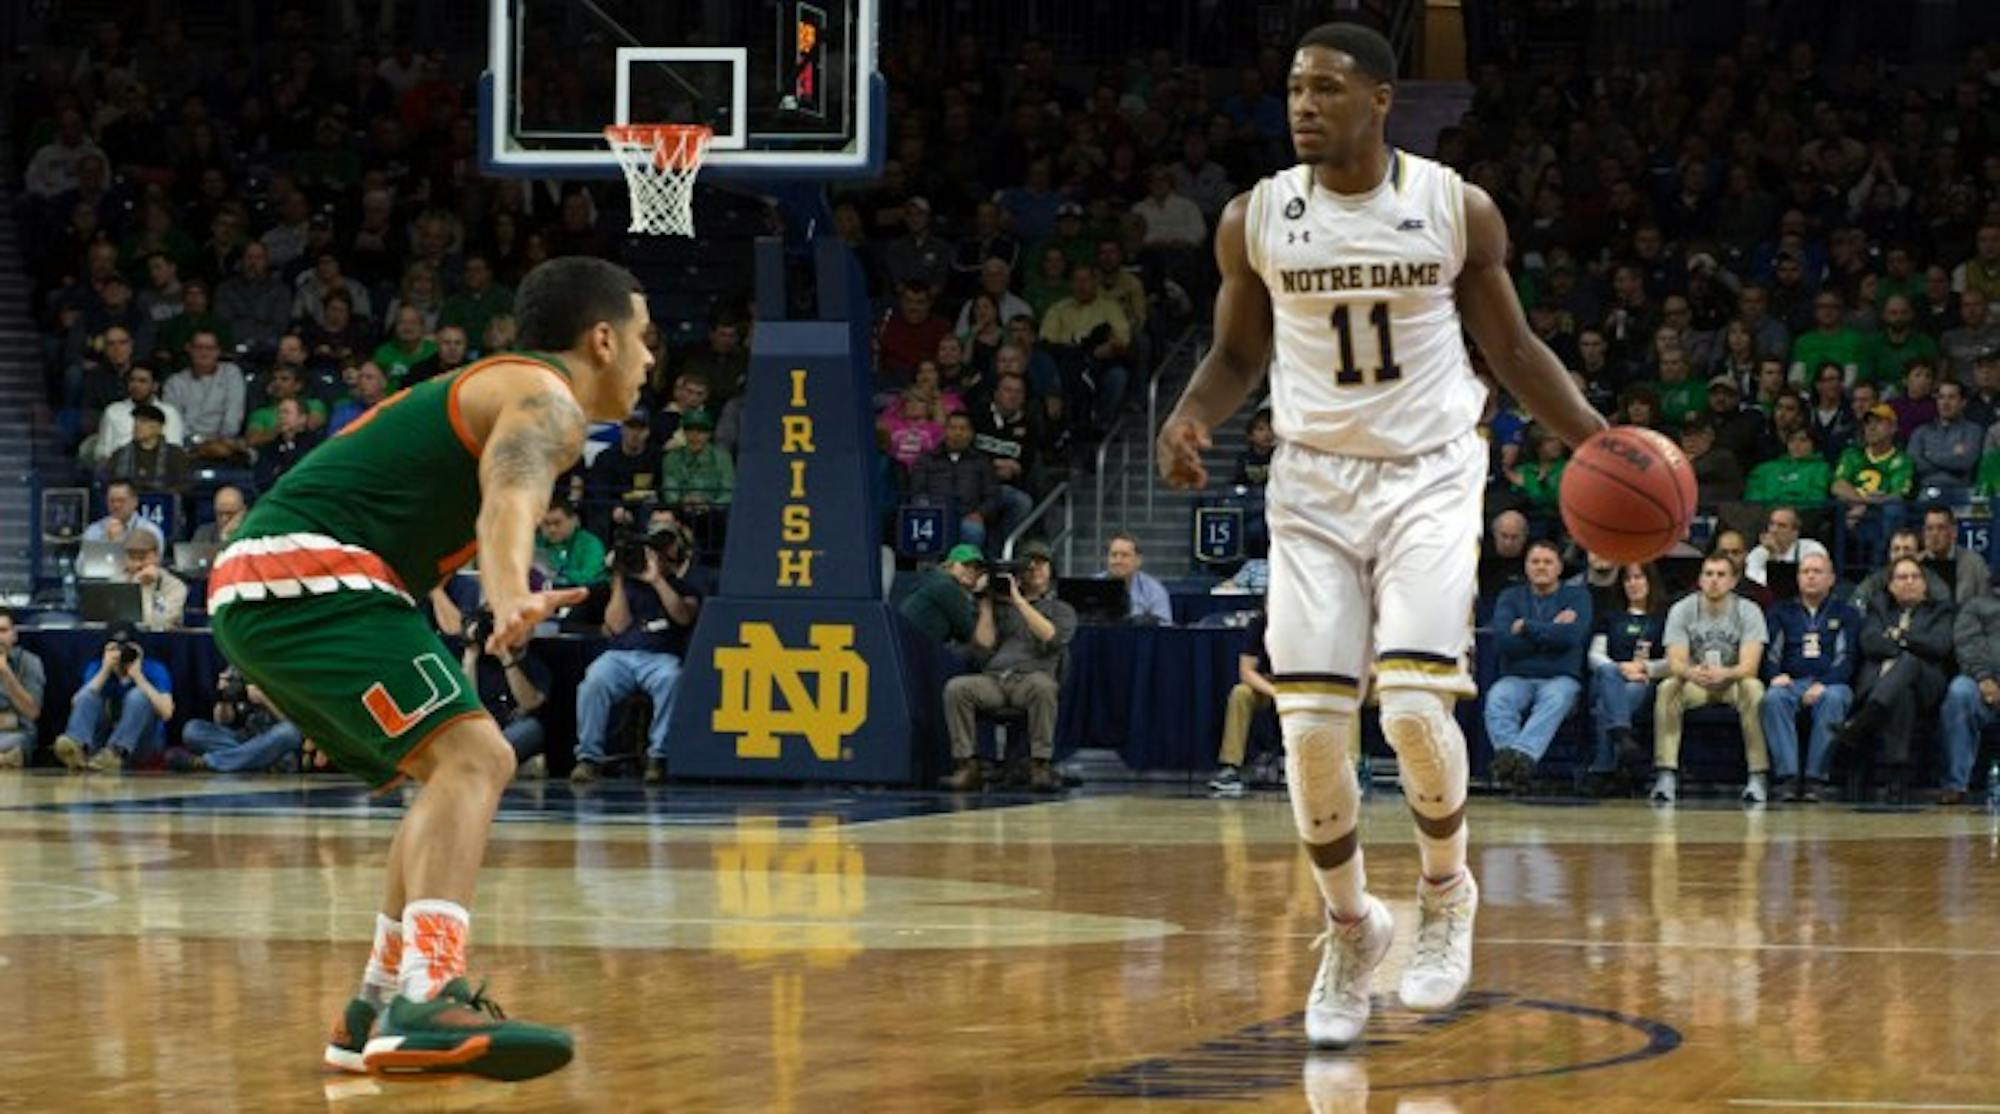 Irish junior guard Demetrius Jackson brings the ball up the court during Notre Dame’s 68-50 loss to Miami (Fla.) on March 2.